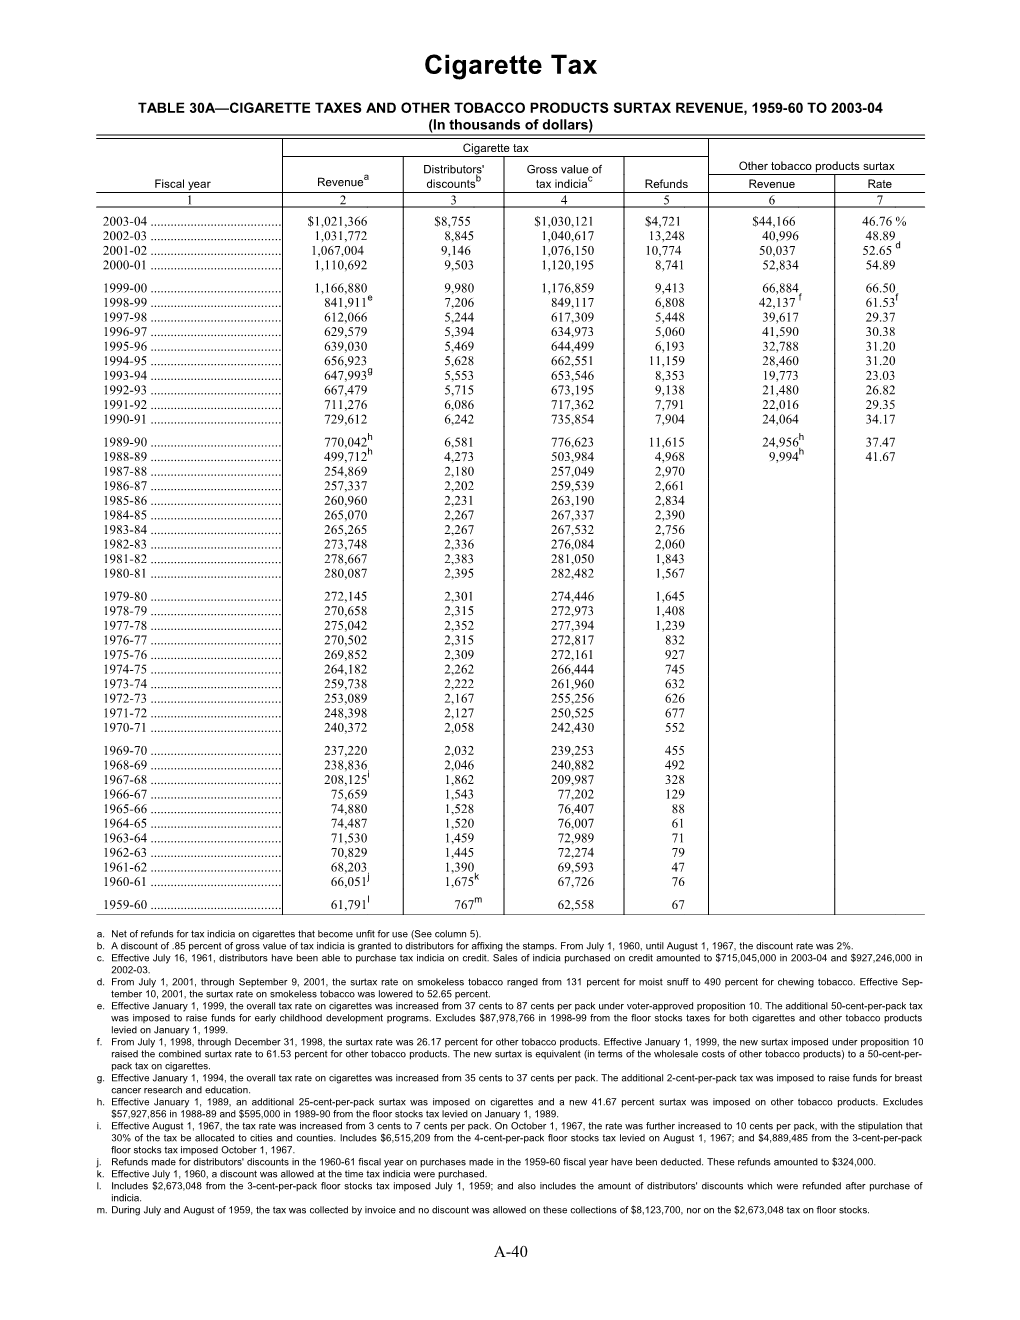 Table 30A Cigarette Taxes and Other Tobacco Products Surtax Revenue, 1959-60 to 2003-04